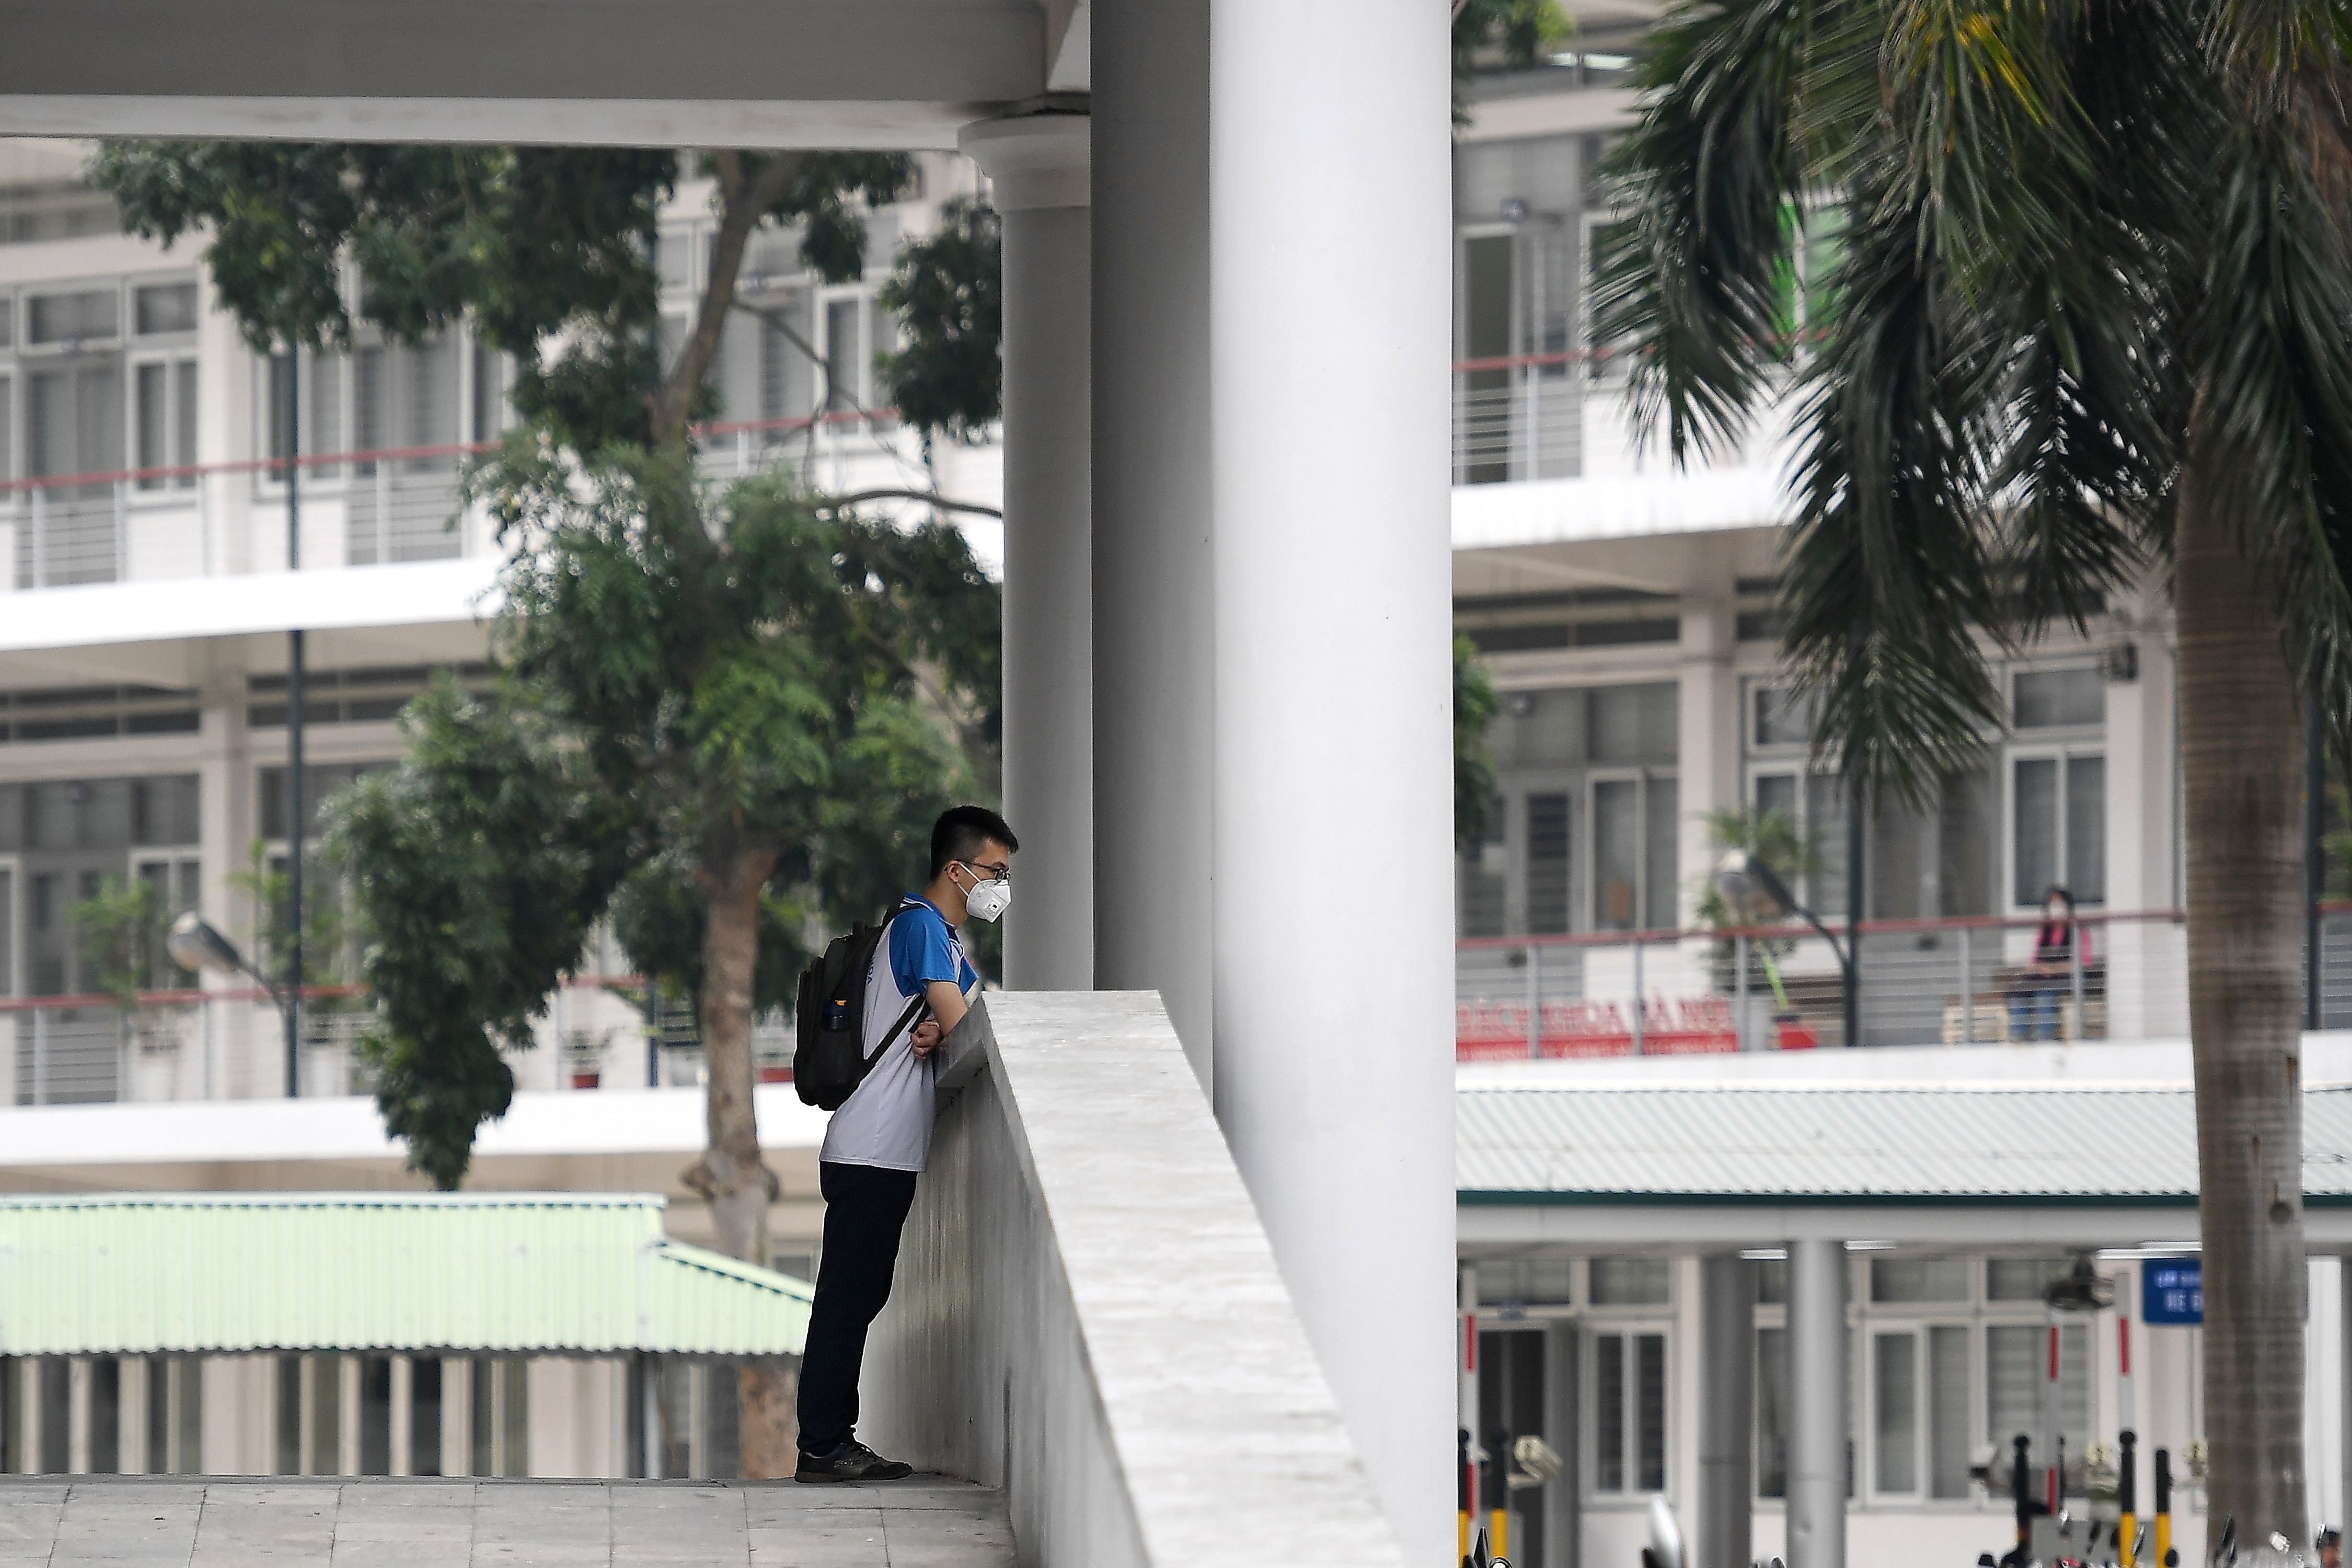 A student, wearing a facemask amid concerns of the COVID-19 novel coronavirus outbreak, stands in the University of Science and Technology campus in Hanoi, (Credit: AFP)